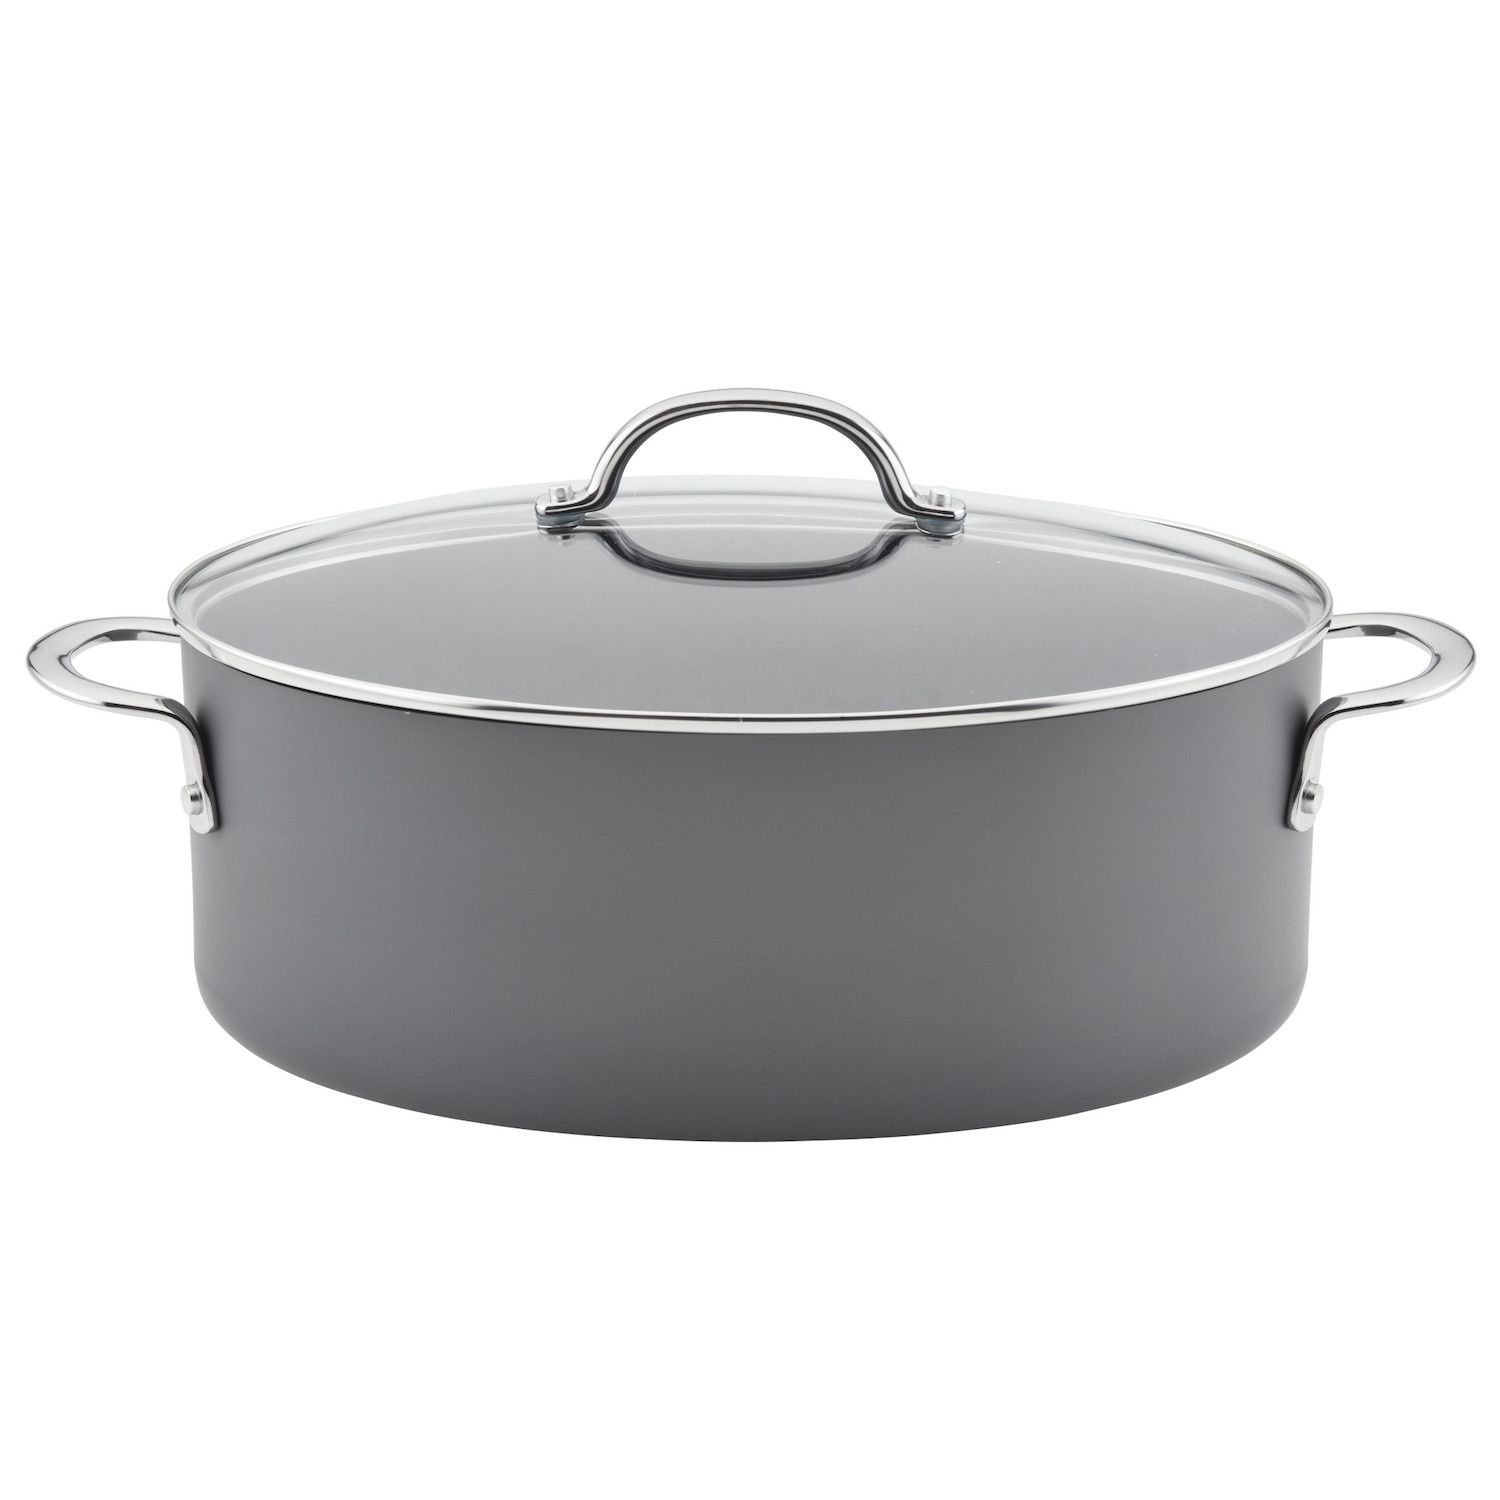 Circulon Total Ti Hi-Low Stainless Steel Non-Stick 8 qt Stock Pot VGUC -  household items - by owner - housewares sale